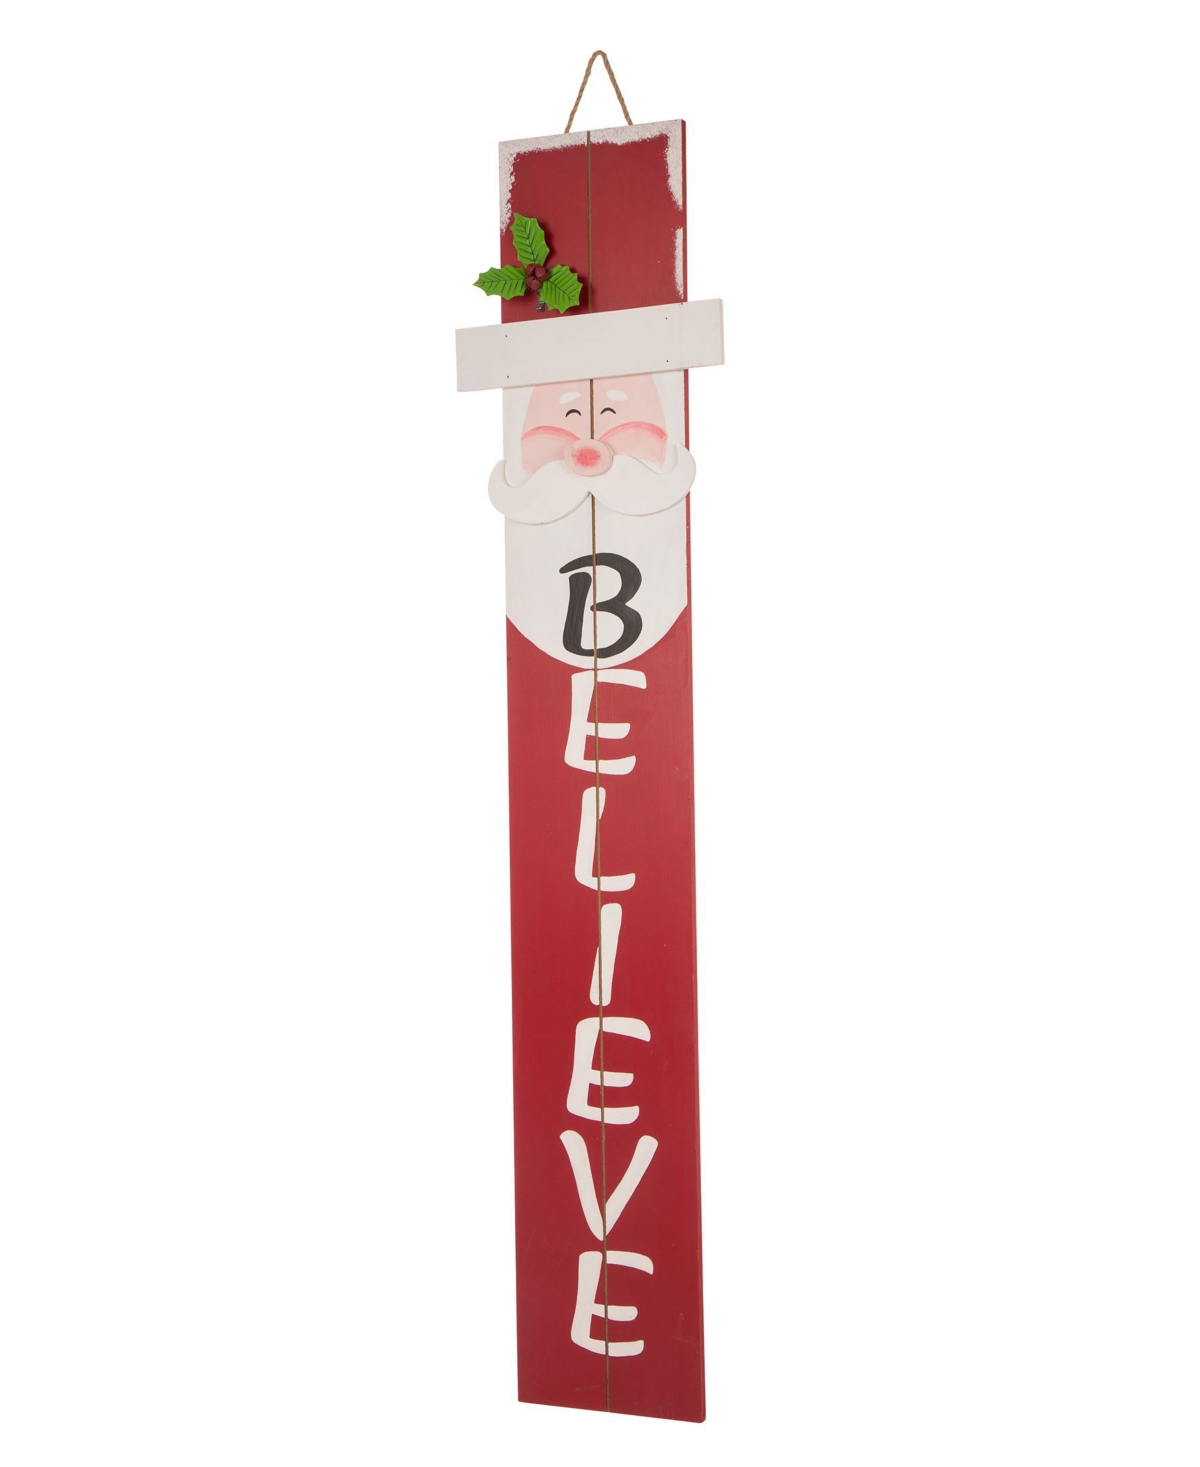 42" H Christmas Believe Wooden Santa Porch Sign - Red